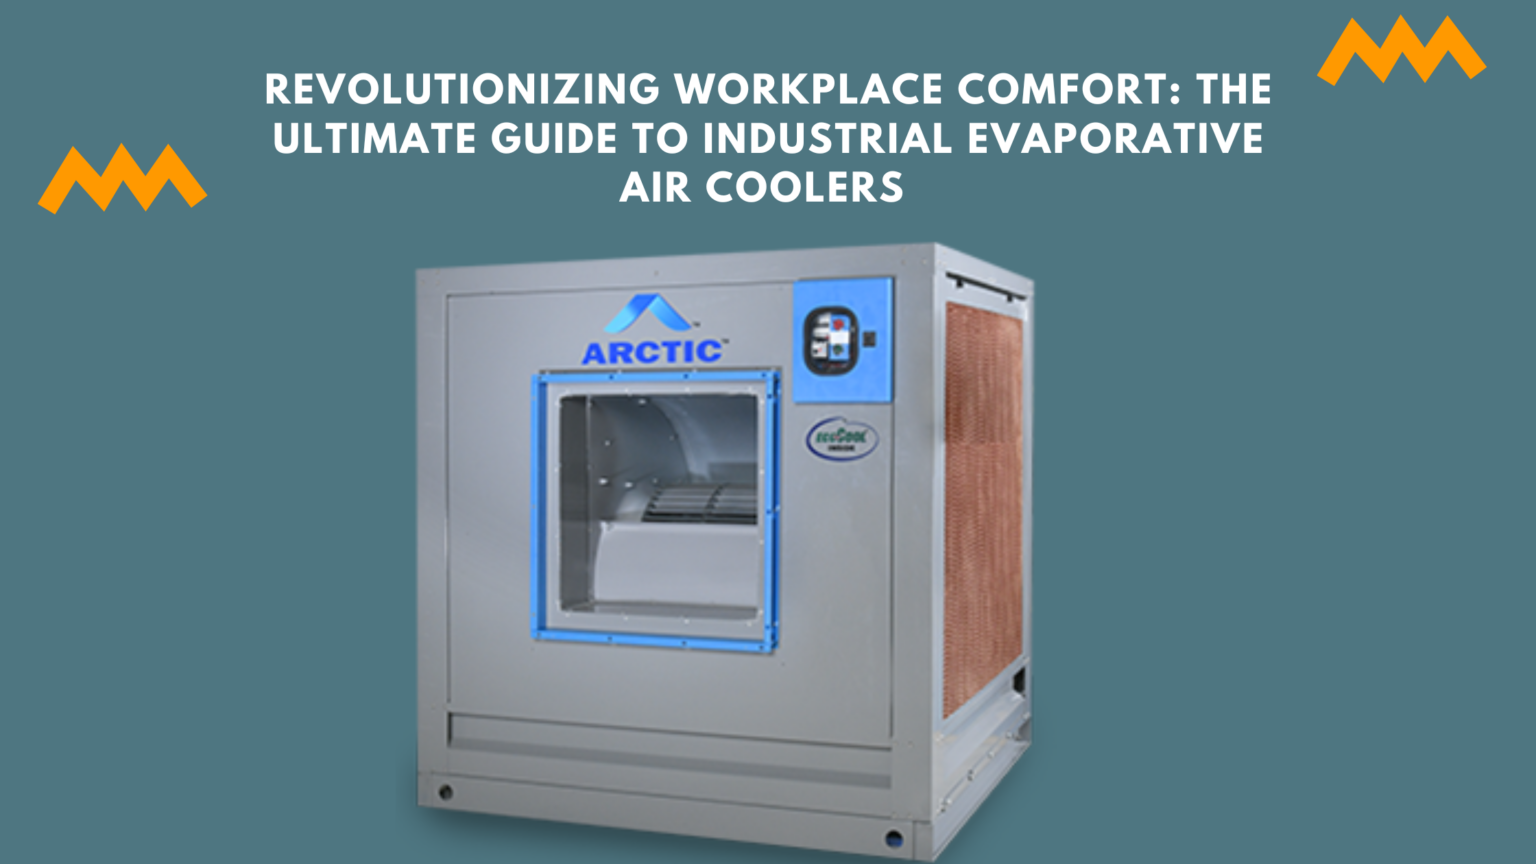 Revolutionizing Workplace Comfort: The Ultimate Guide to Industrial Evaporative Air Coolers